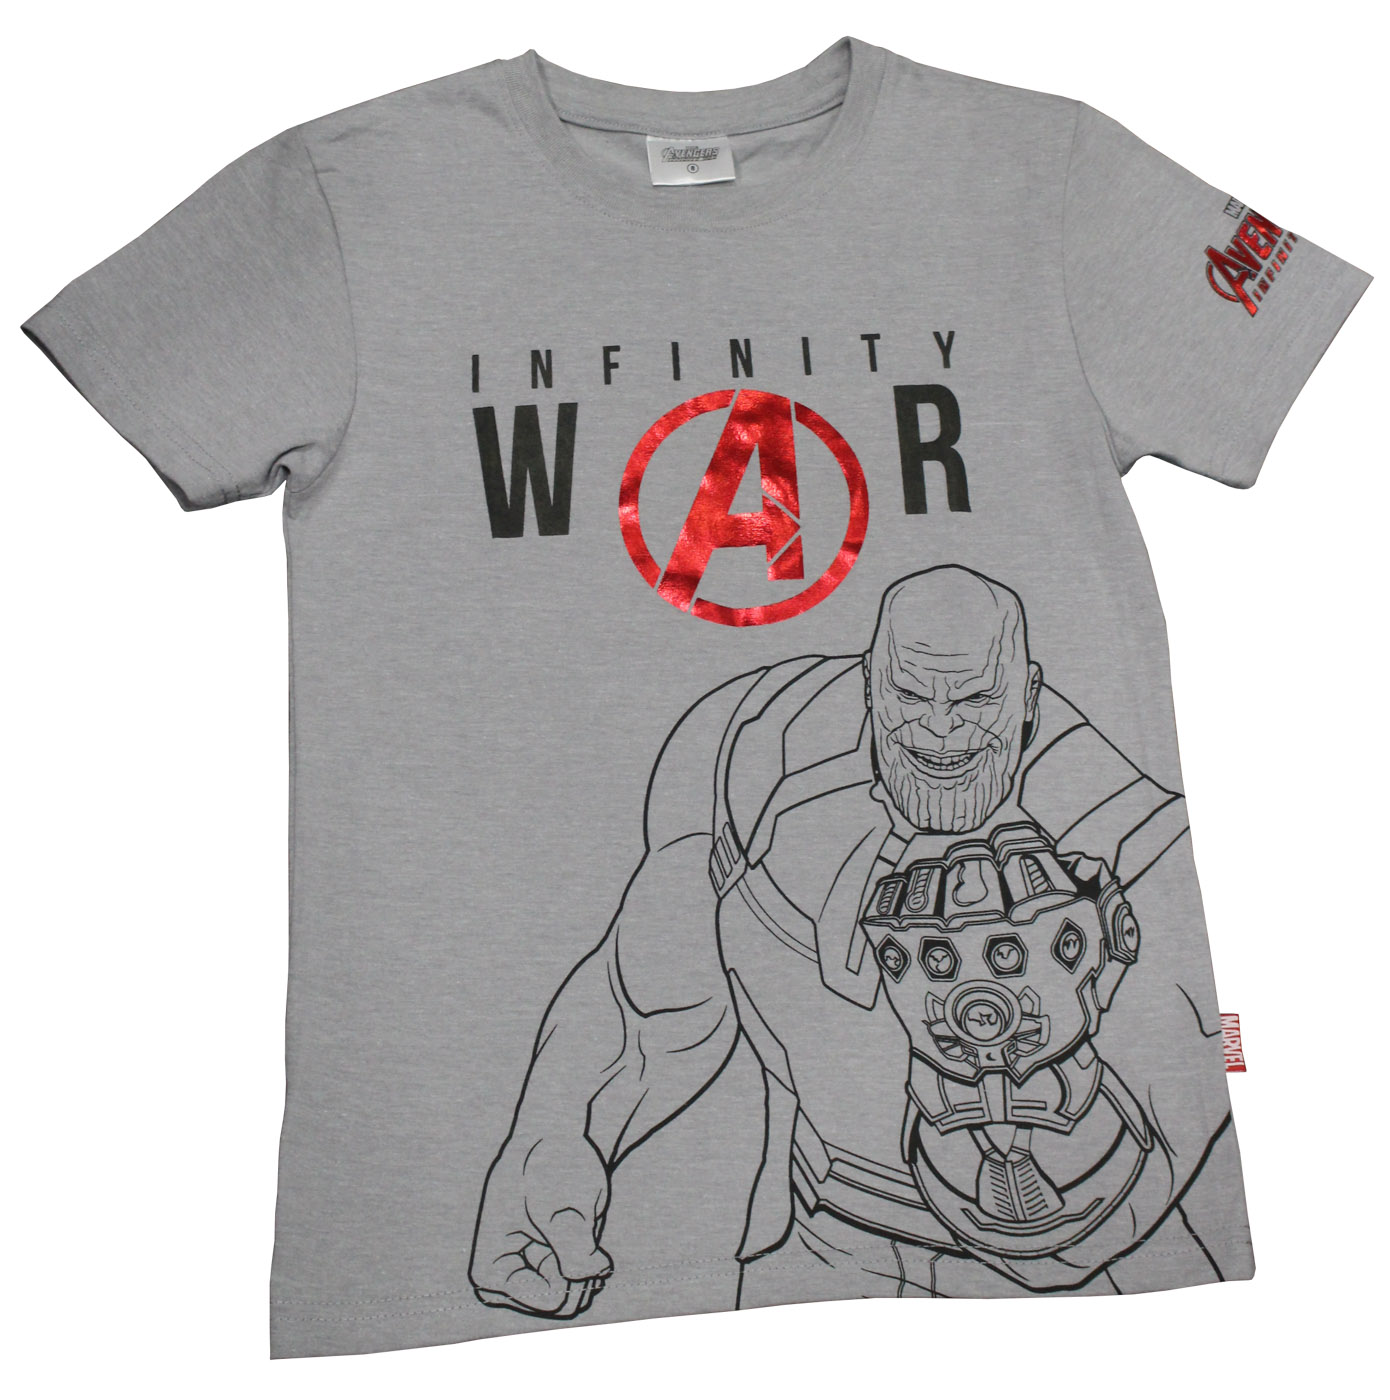 INFINITY WAR SHIRT. P299.75 at Robinsons Department Stores. Photo courtesy of The Walt Disney Company (Philippines), Inc. 